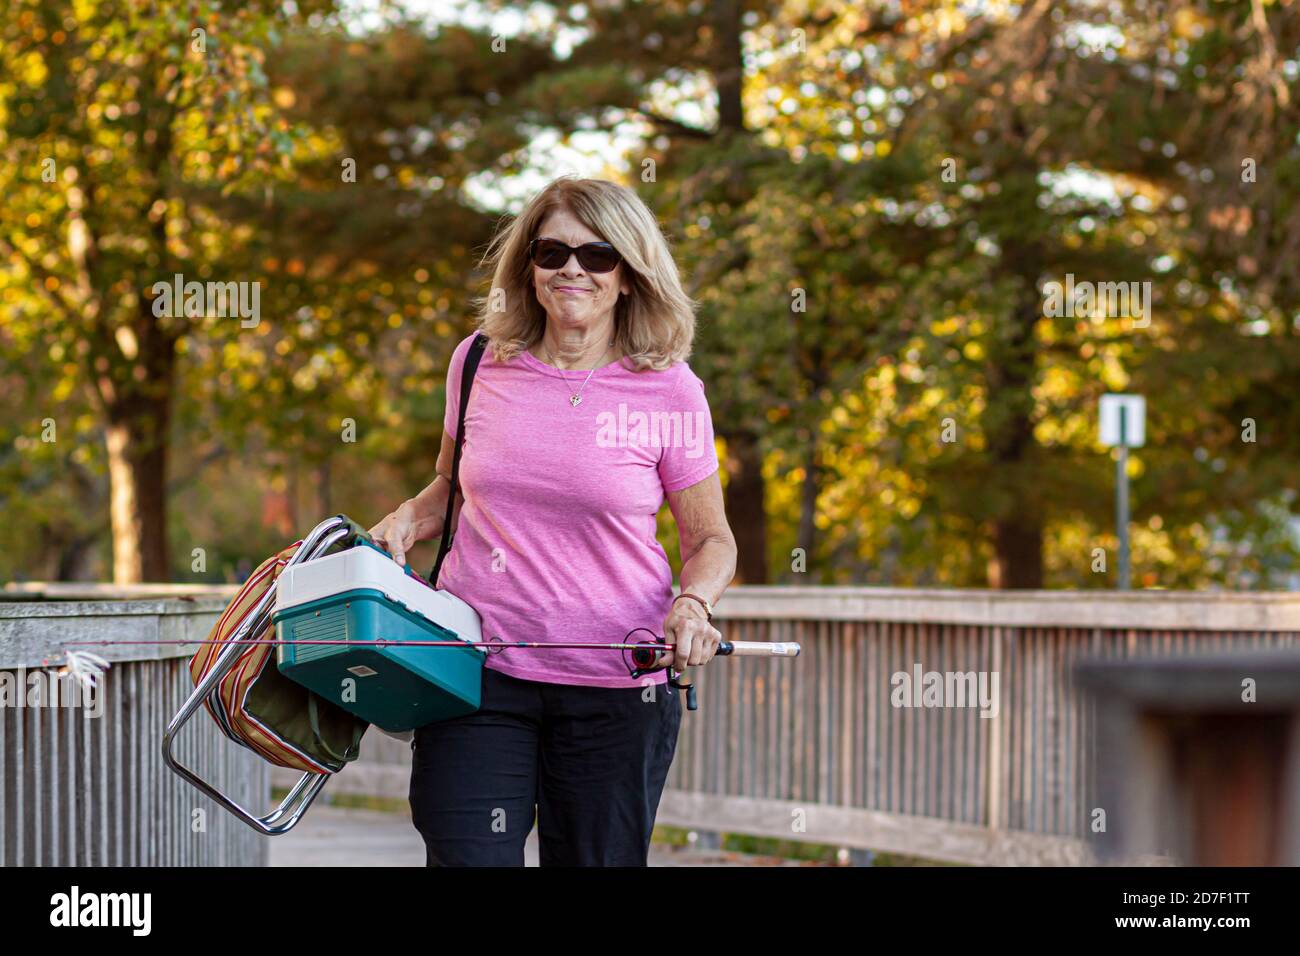 Frederick, MD, USA 10/14/2020: A middle aged caucasian woman with